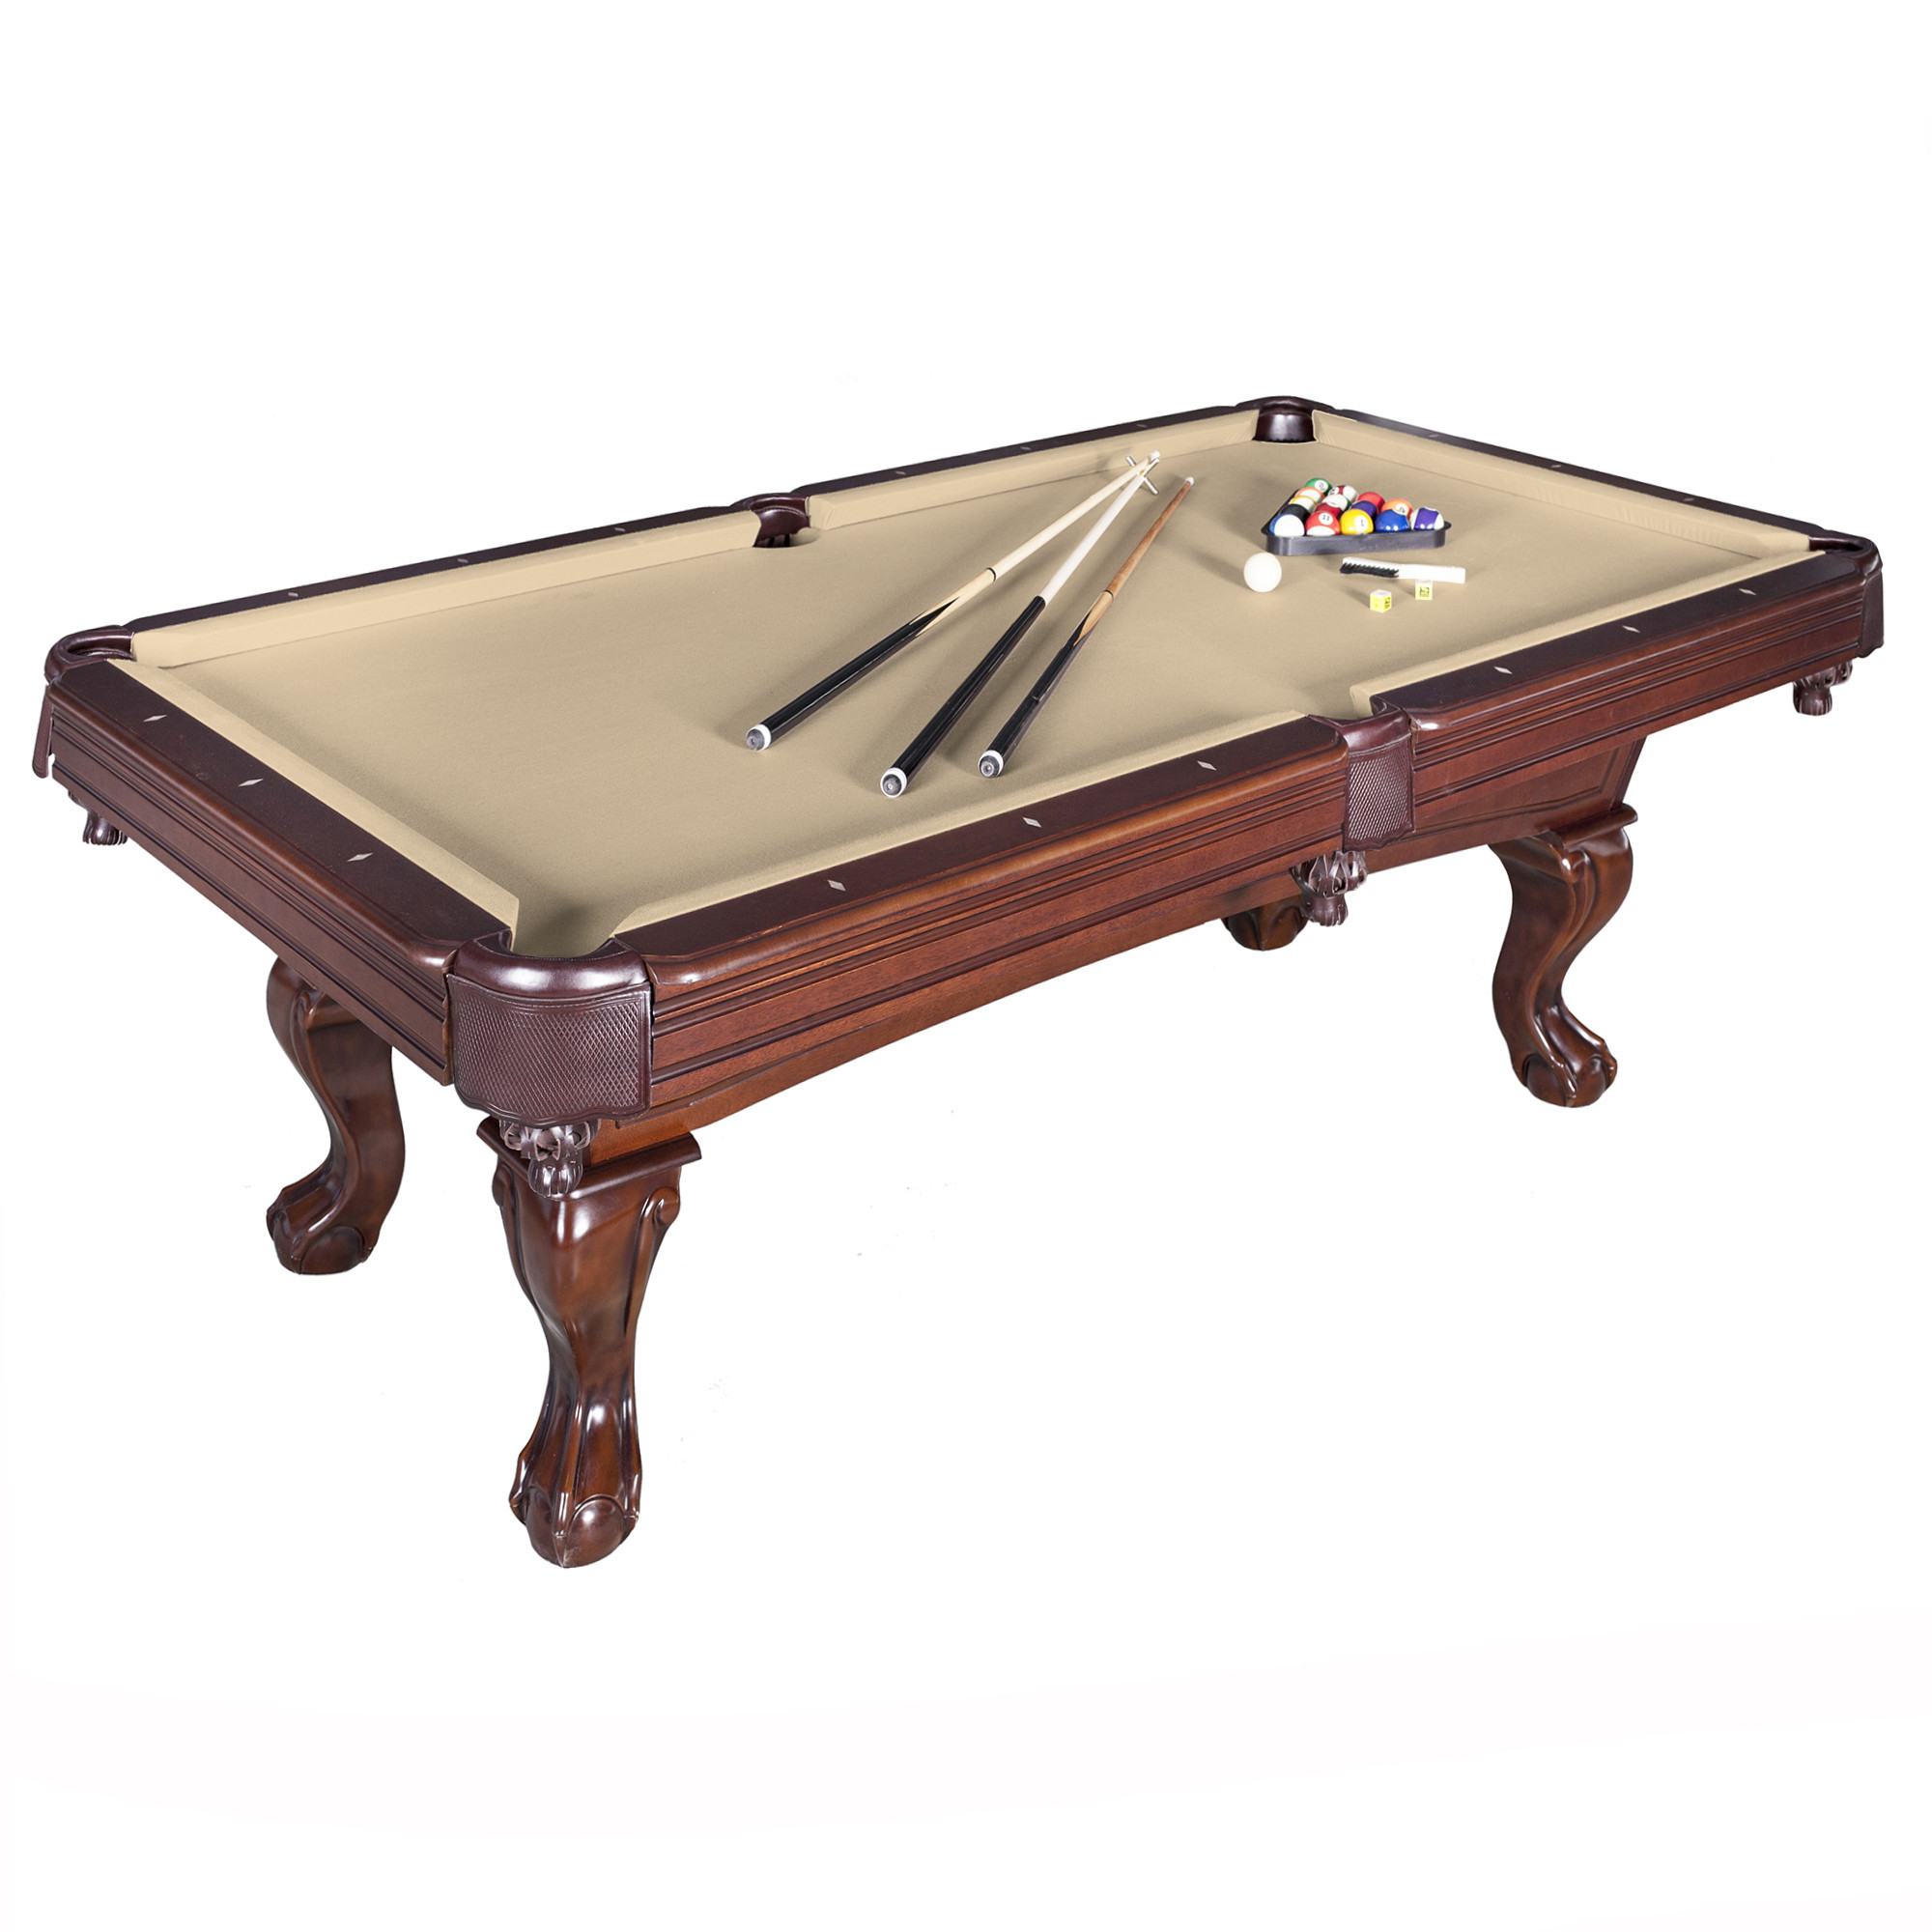 Hathaway Augusta 8 ft. Non-Slate Pool Table - Walnut Finish, 100.5-in l x 55-in w, Camel Felt - image 1 of 14